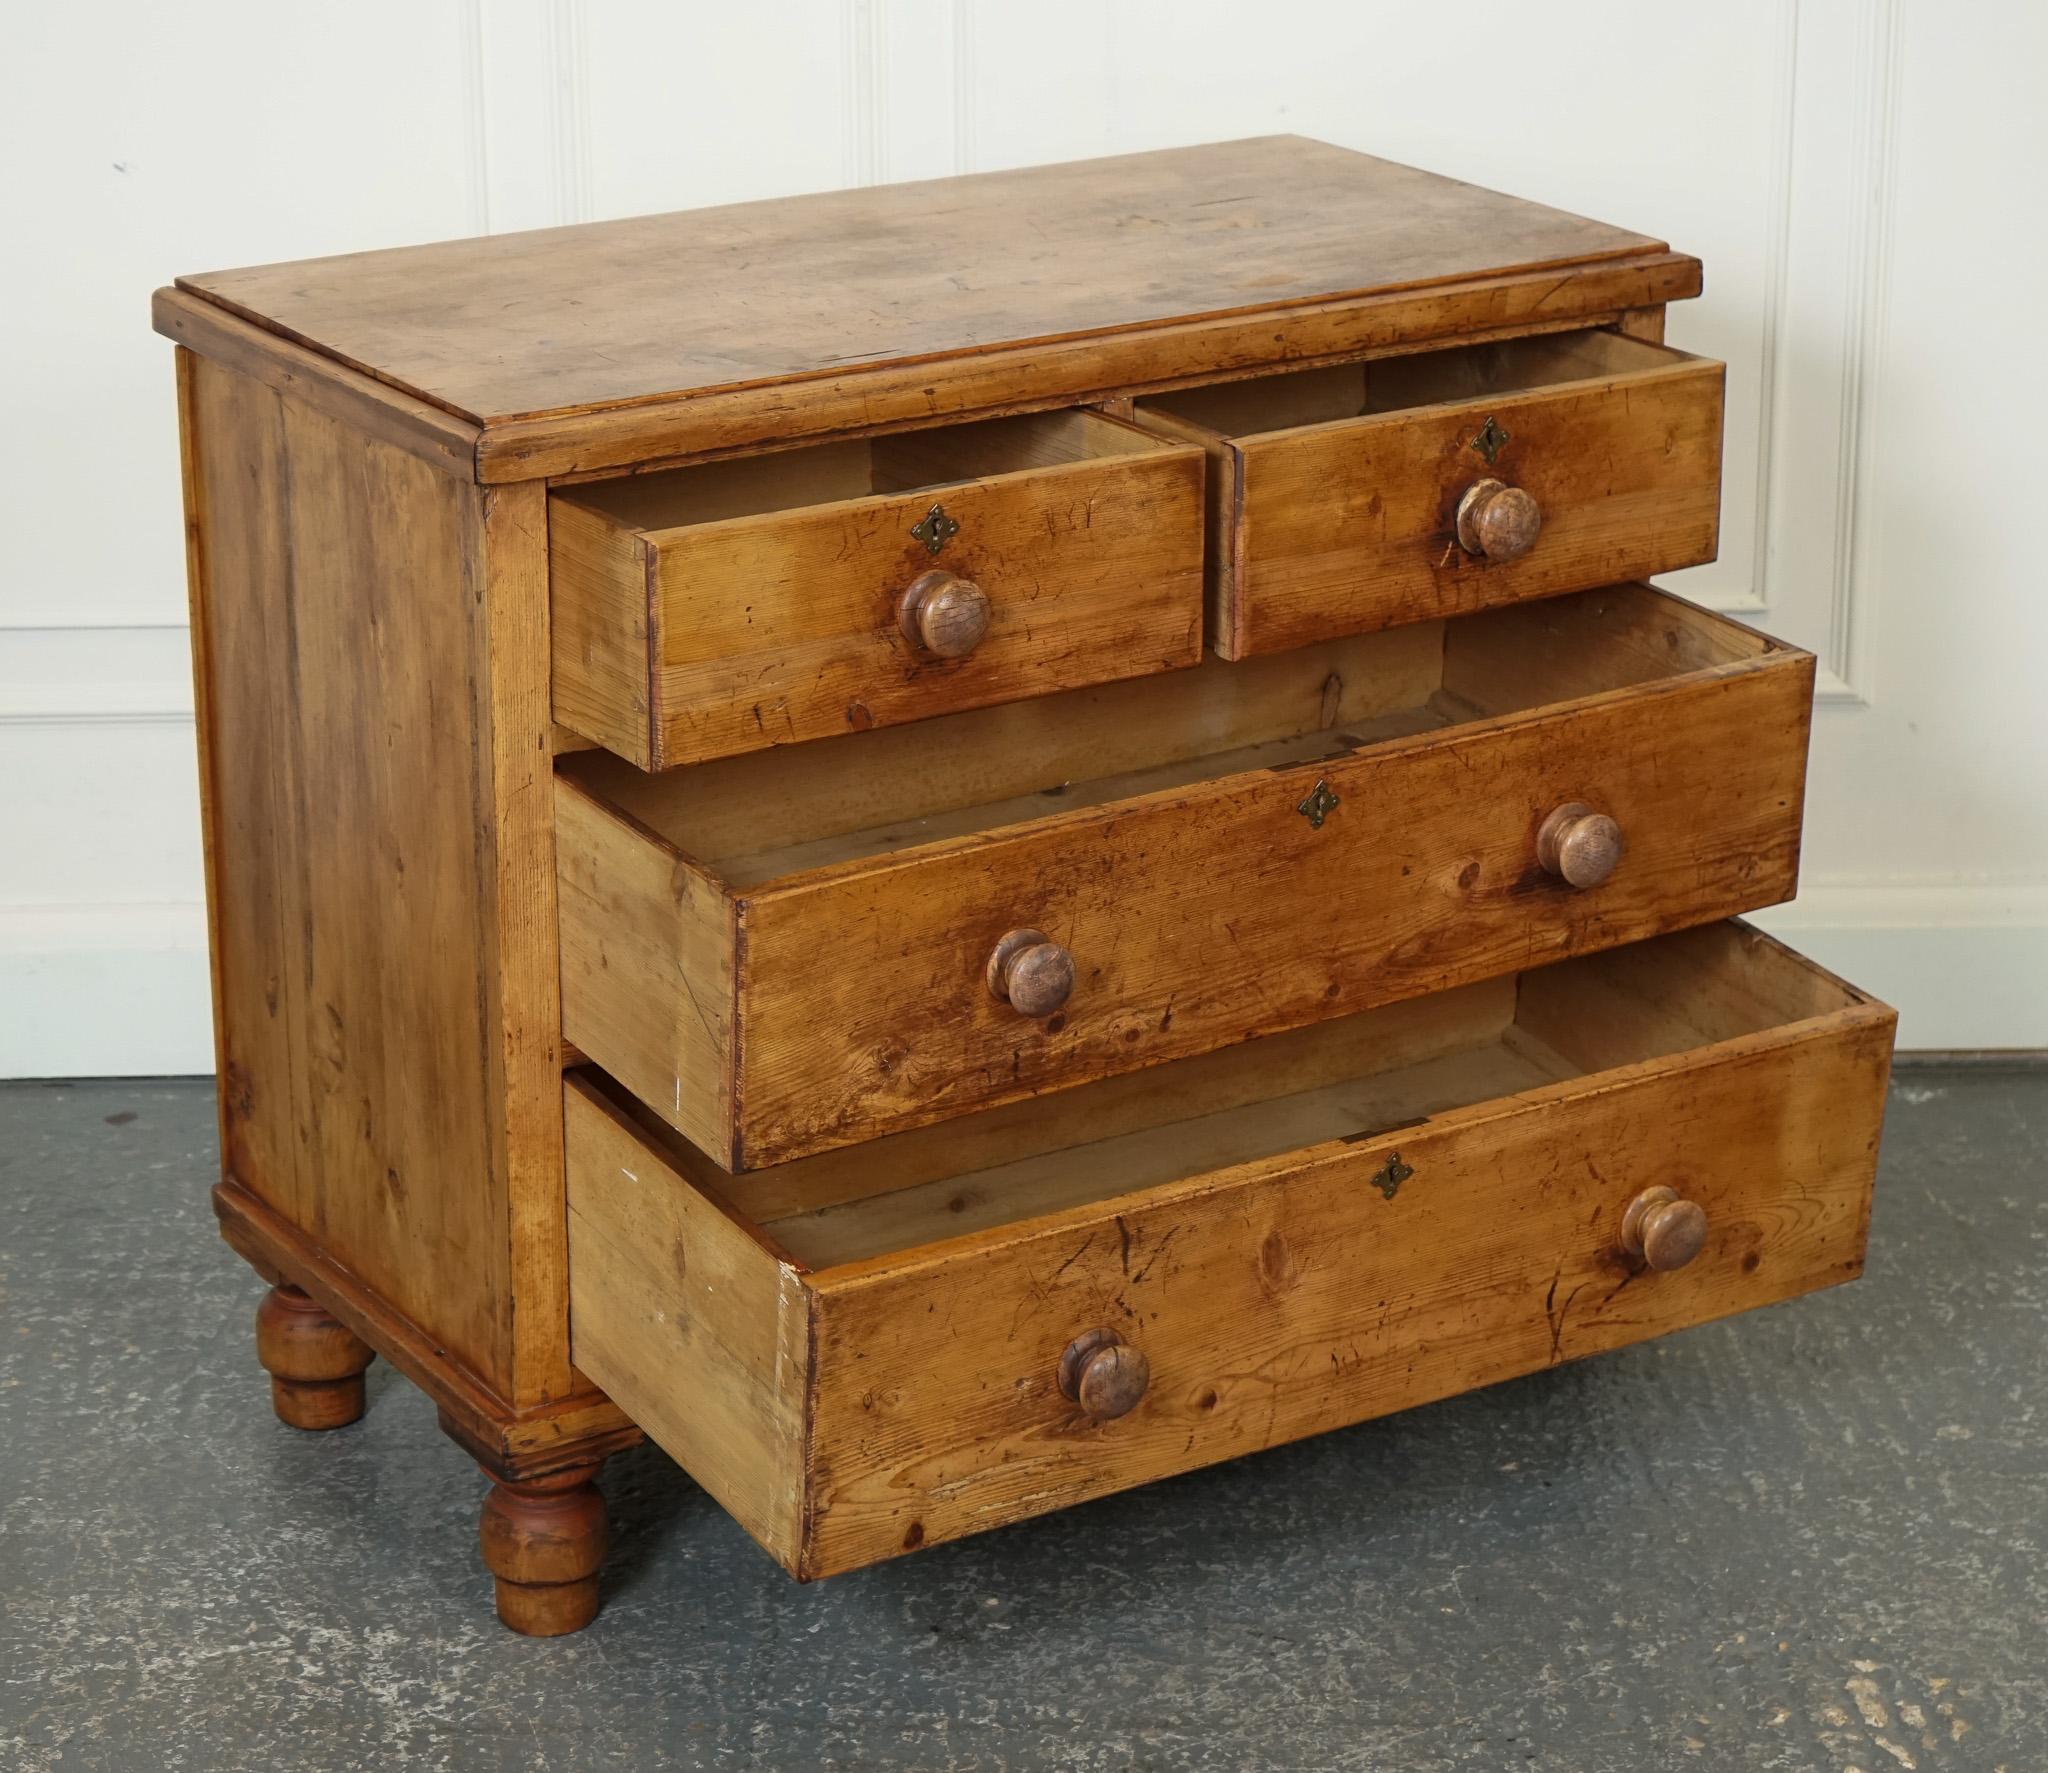 British ANTIQUE LATE VICTORIAN PINE CHEST OF DRAWERS WITH ORIGiNAL TURNED WOODEN HANDLES